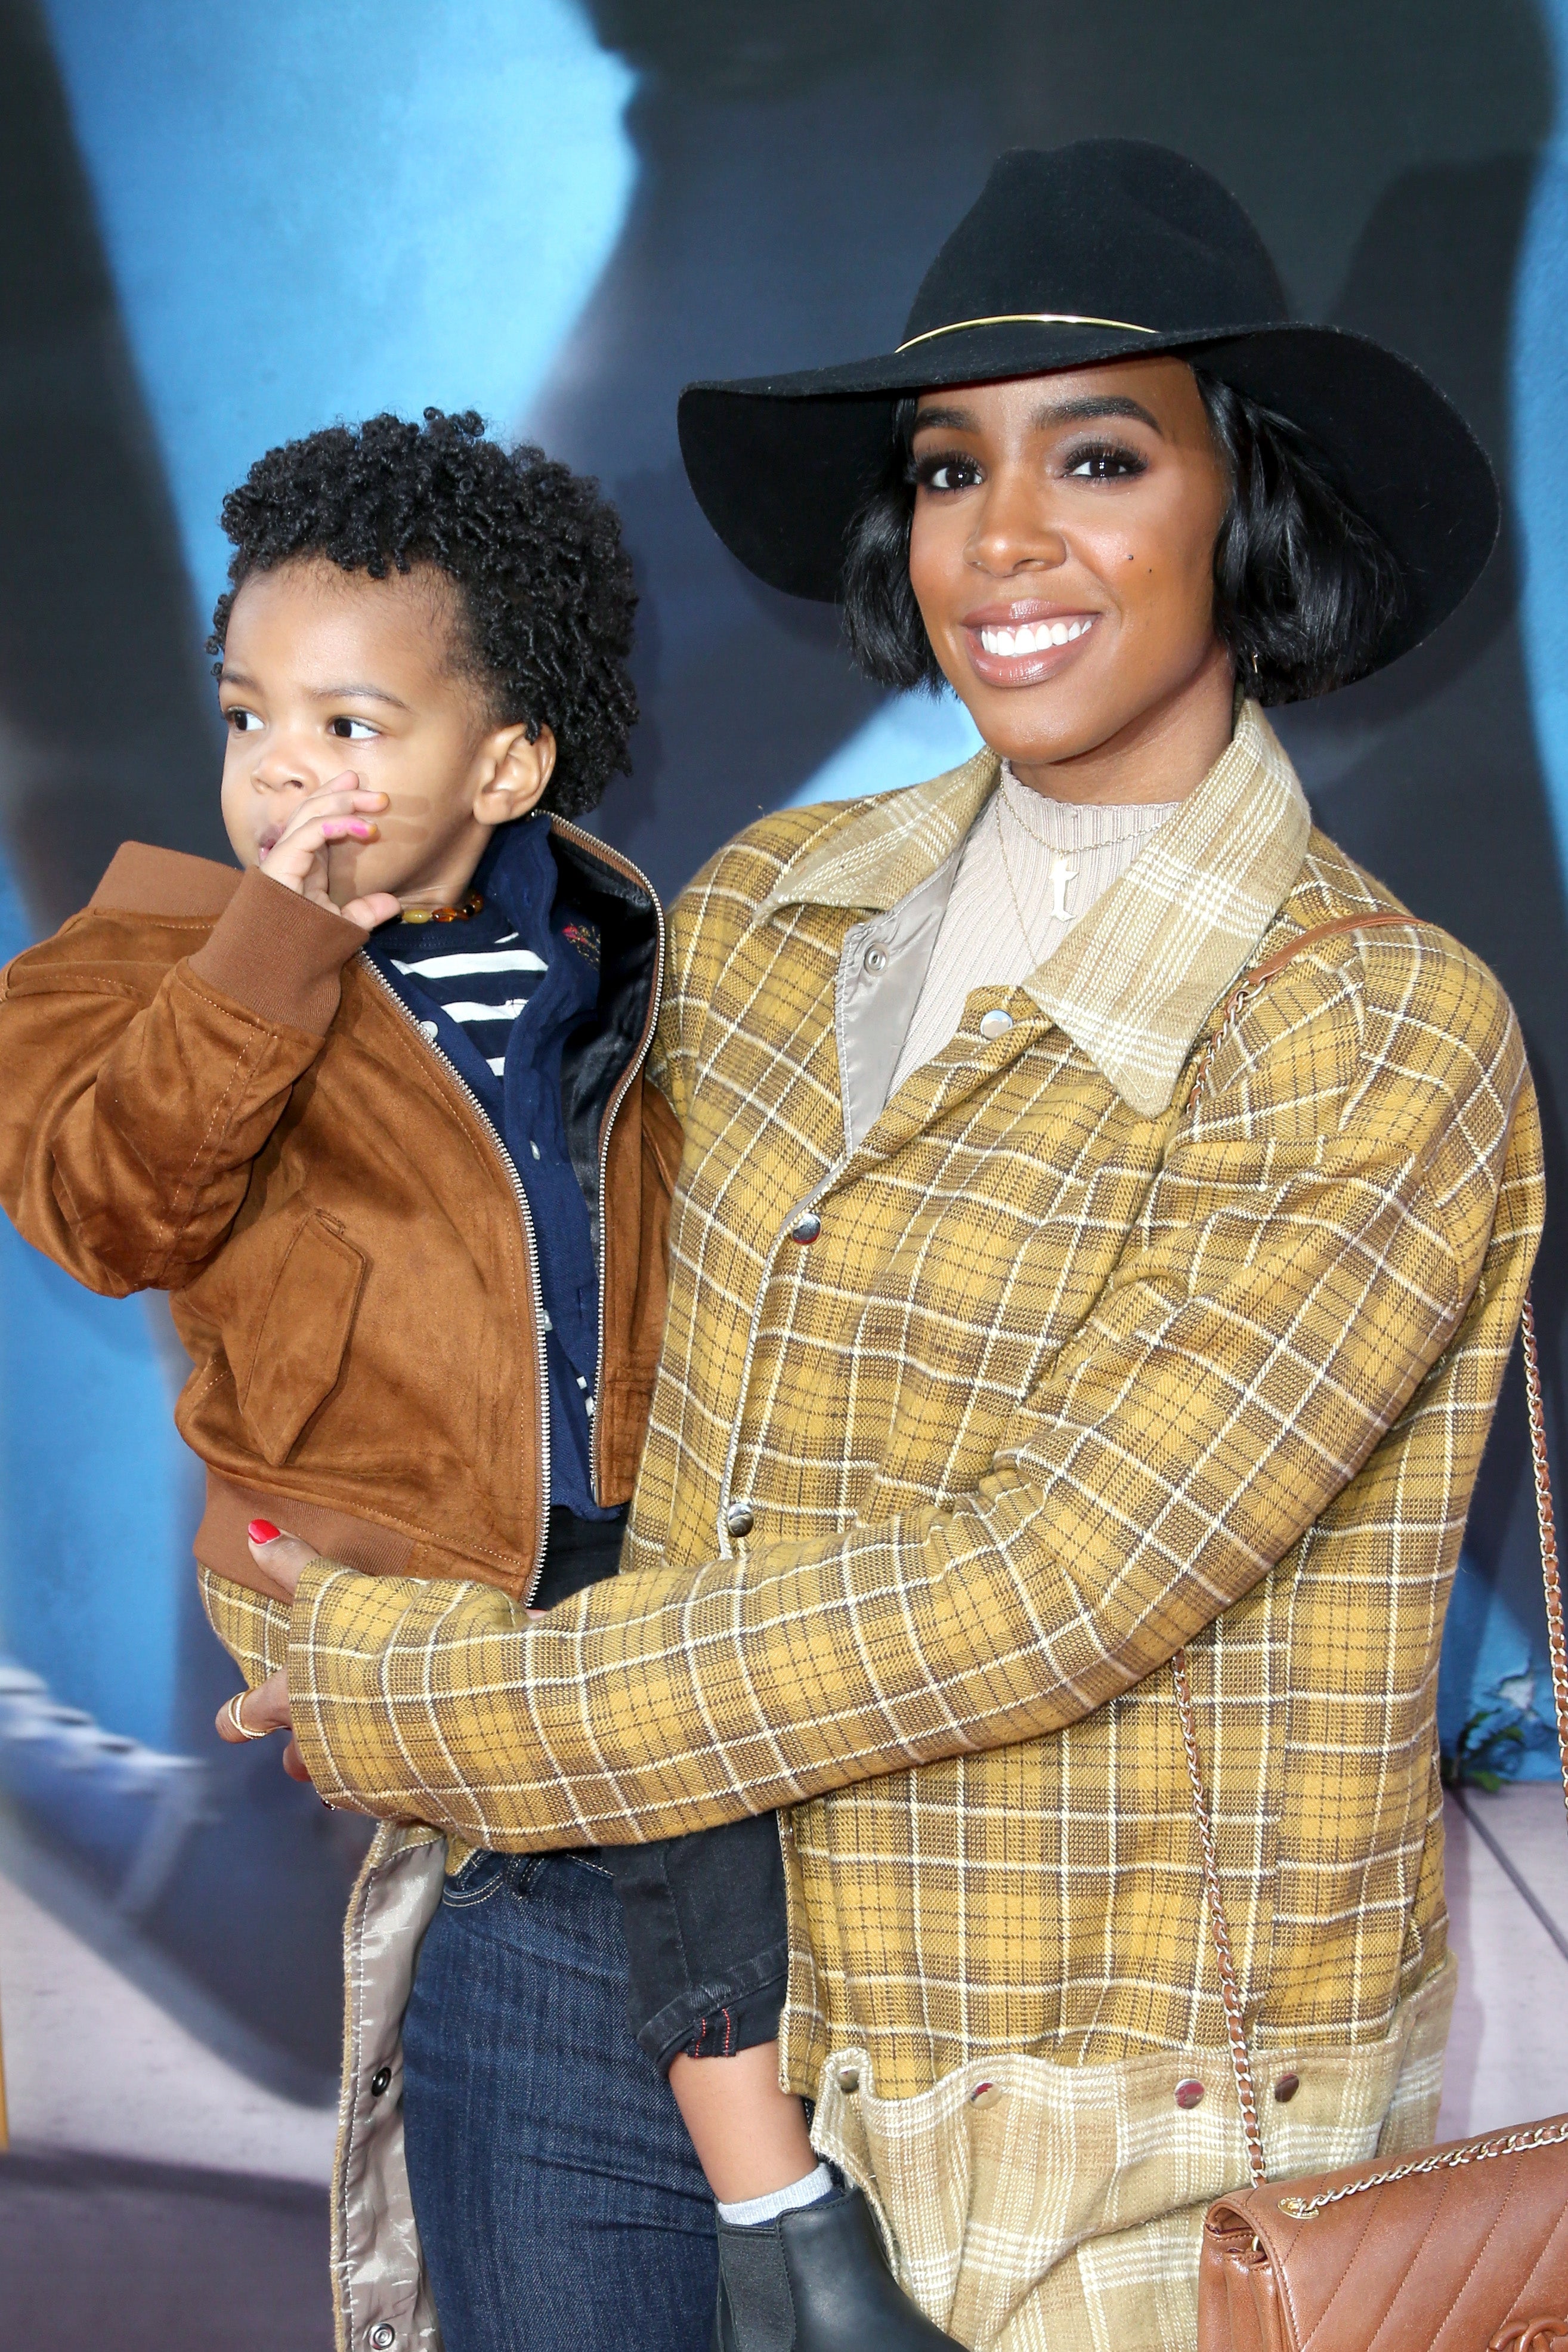 Kelly Rowland's Son Titan Is Already Showing Musical Talent: He Plays Piano 'Every Single Day'
